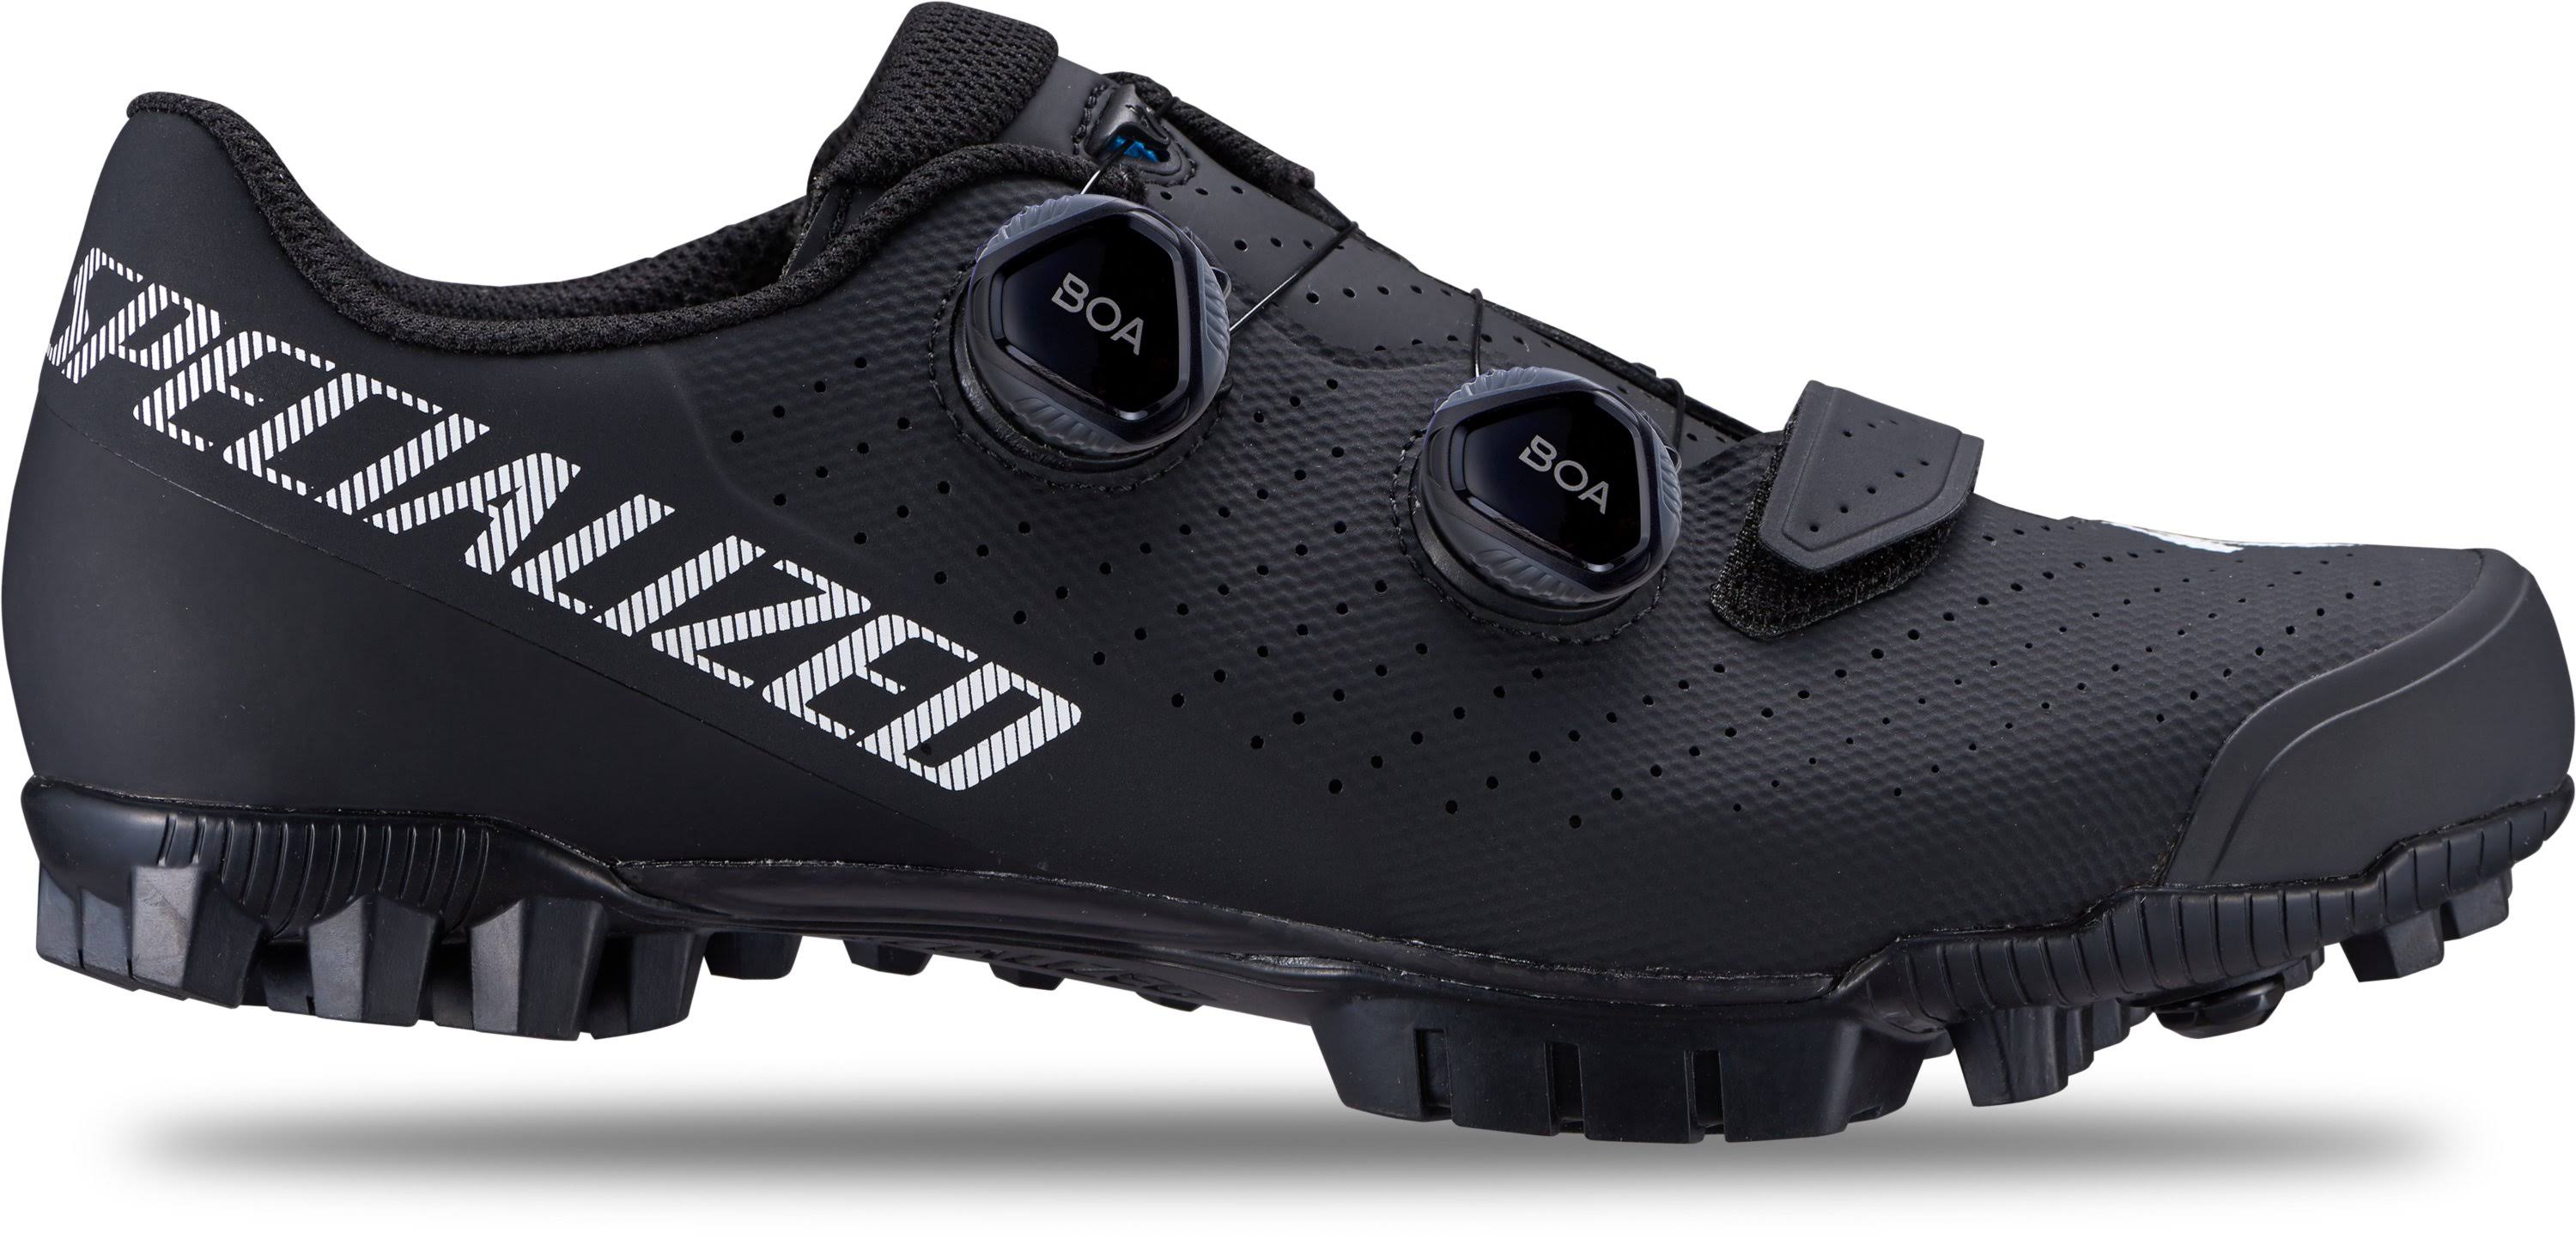 Specialized Recon 1.0 Mountain Bike Shoes - Black - 39